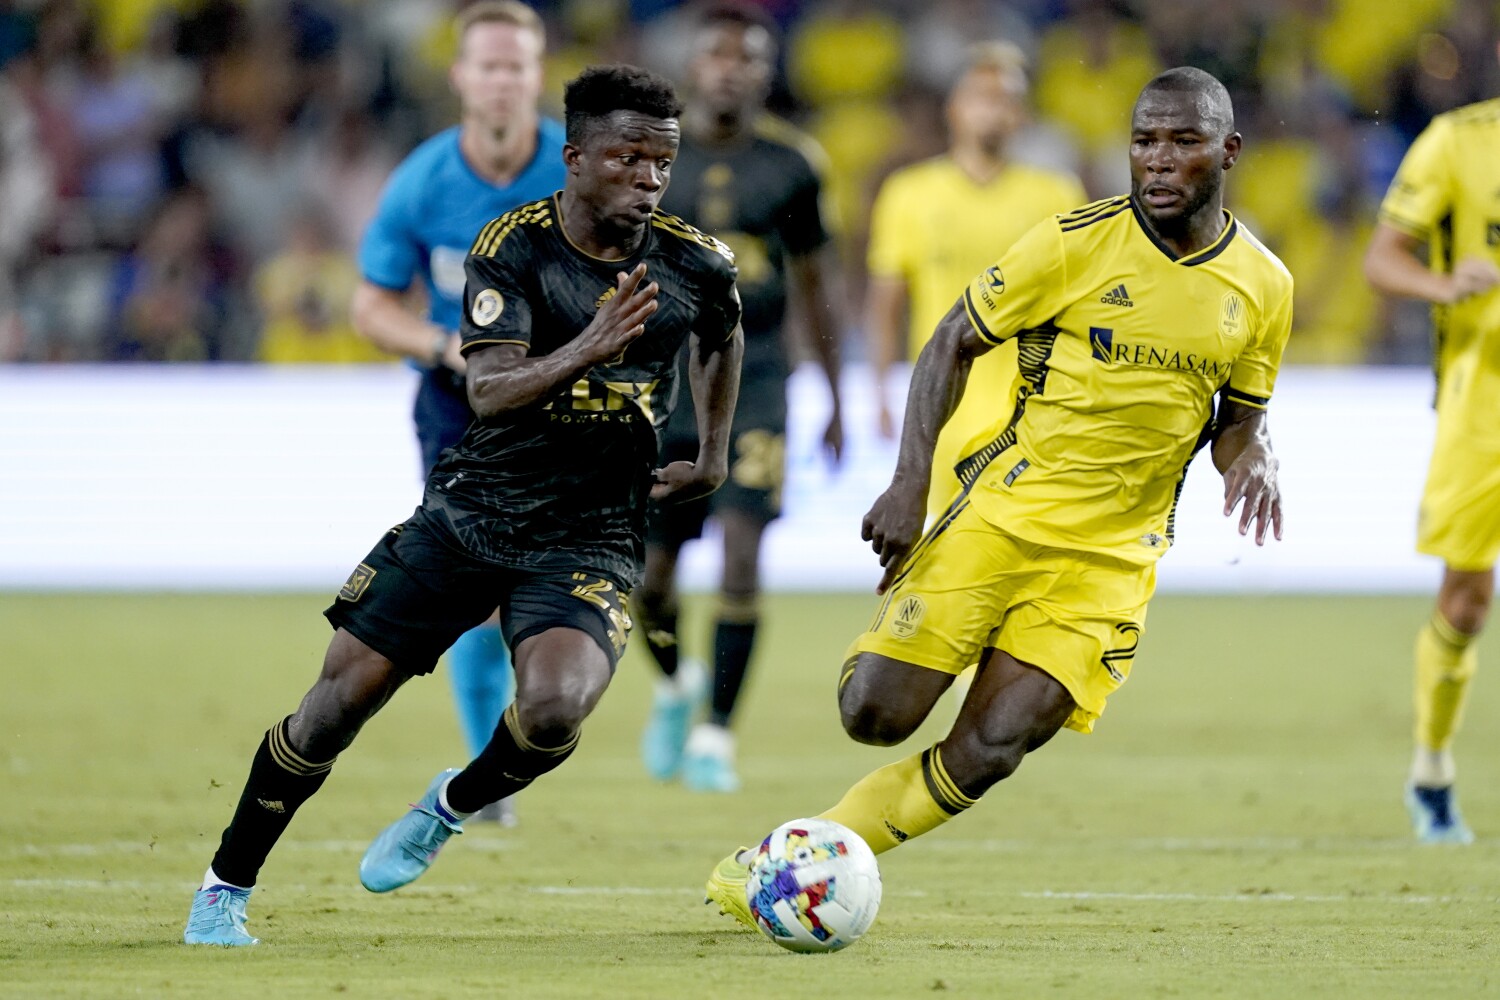 LAFC's seven-match winning streak ends with loss at San Jose